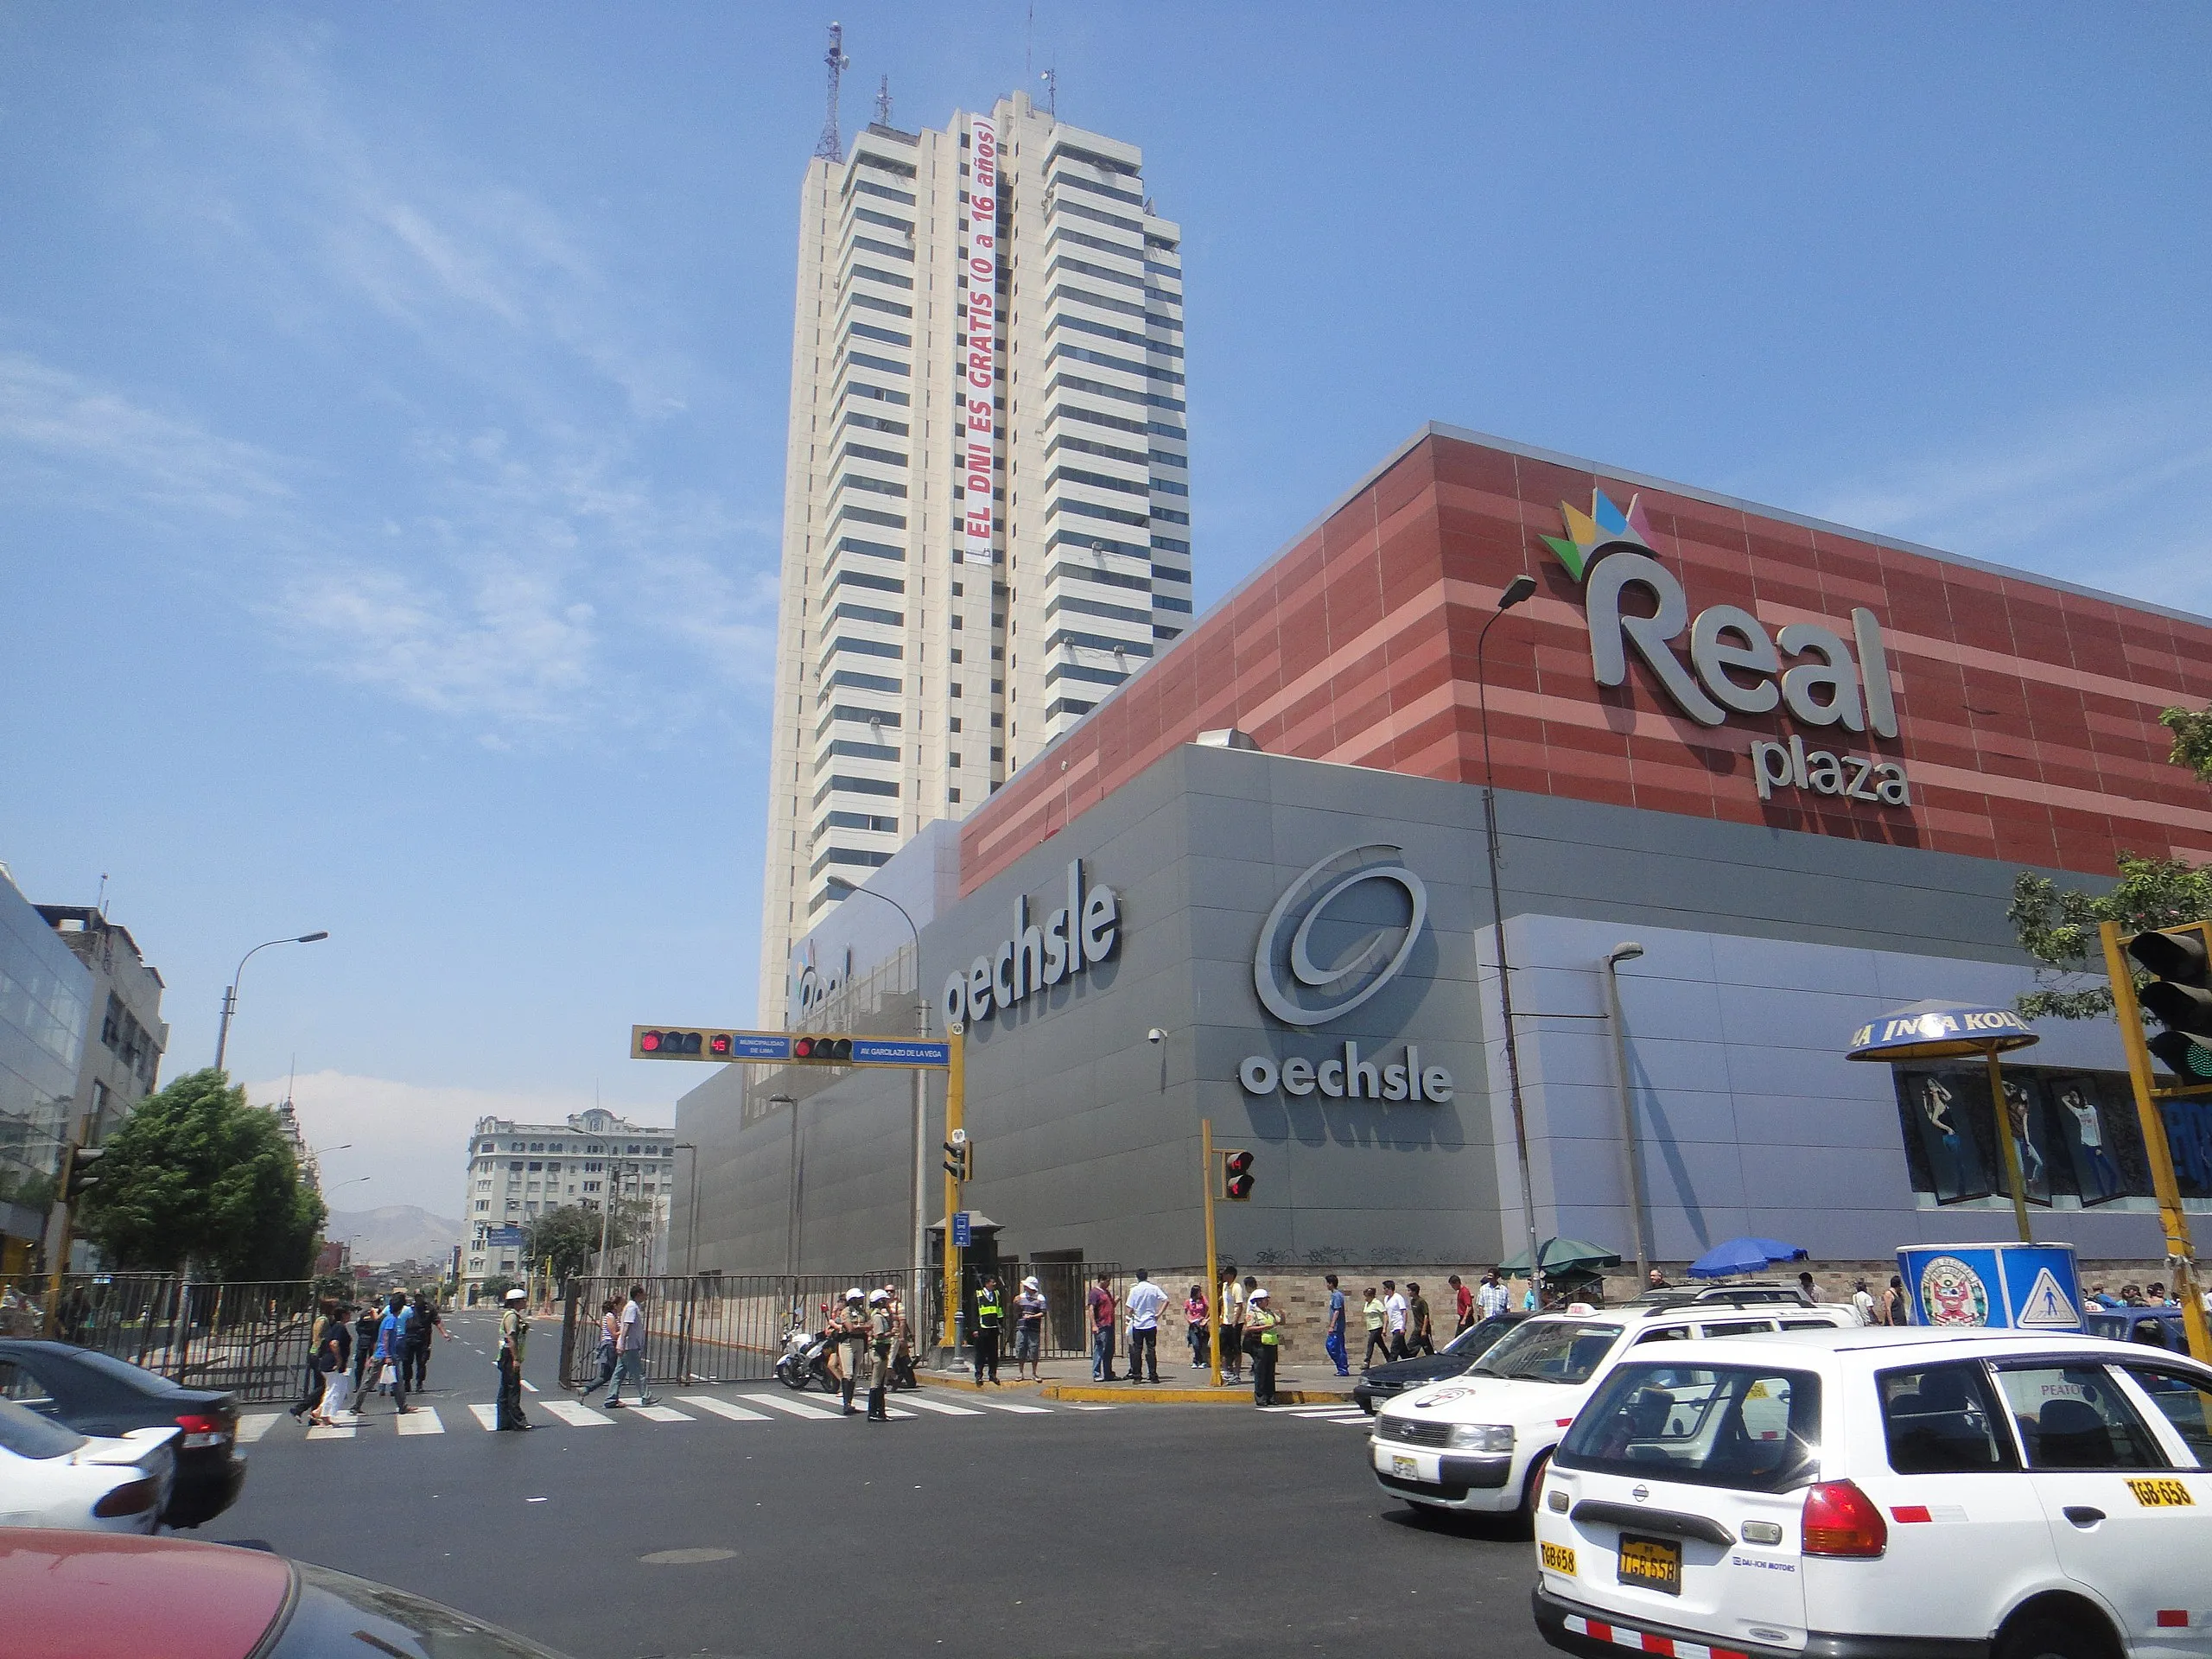 Real Plaza Civic Center in Peru, south_america | Handbags,Shoes,Clothes,Home Decor,Cosmetics,Swimwear - Country Helper